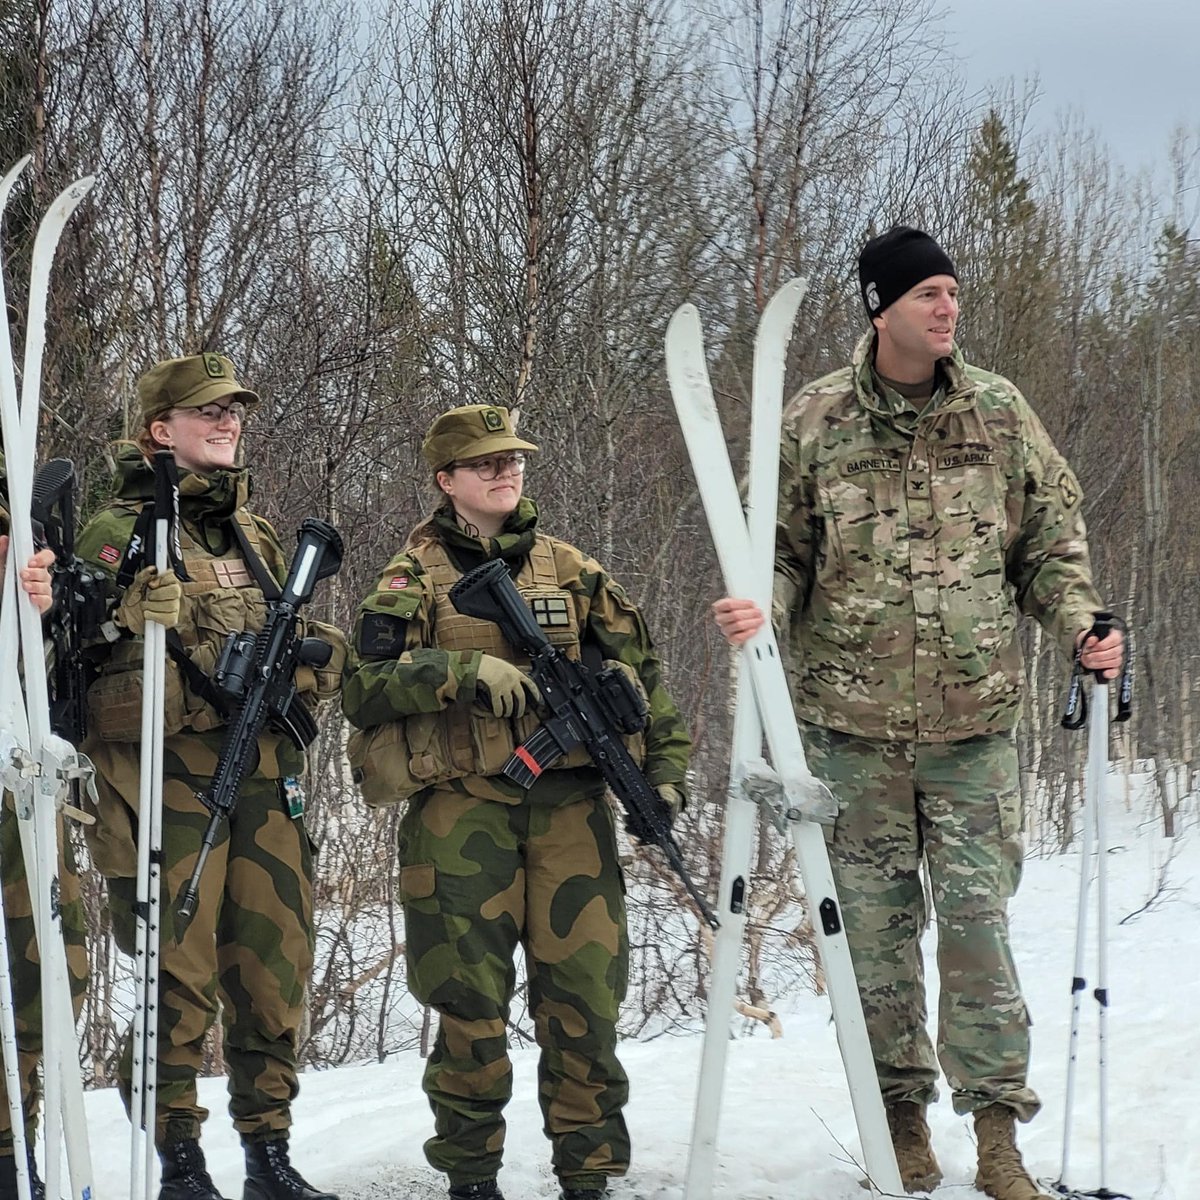 #Soldiers with @3_10MTNPatriots, @10MTNDIV were taught the basics of cross country skiing ⛷️ by the Norwegian Home Guard 🇳🇴. The Patriot Brigade is participating in exercise #DefenderEurope working alongside our NATO allies. 

#Readiness #StrongerTogether #ArmyTeam @USArmy